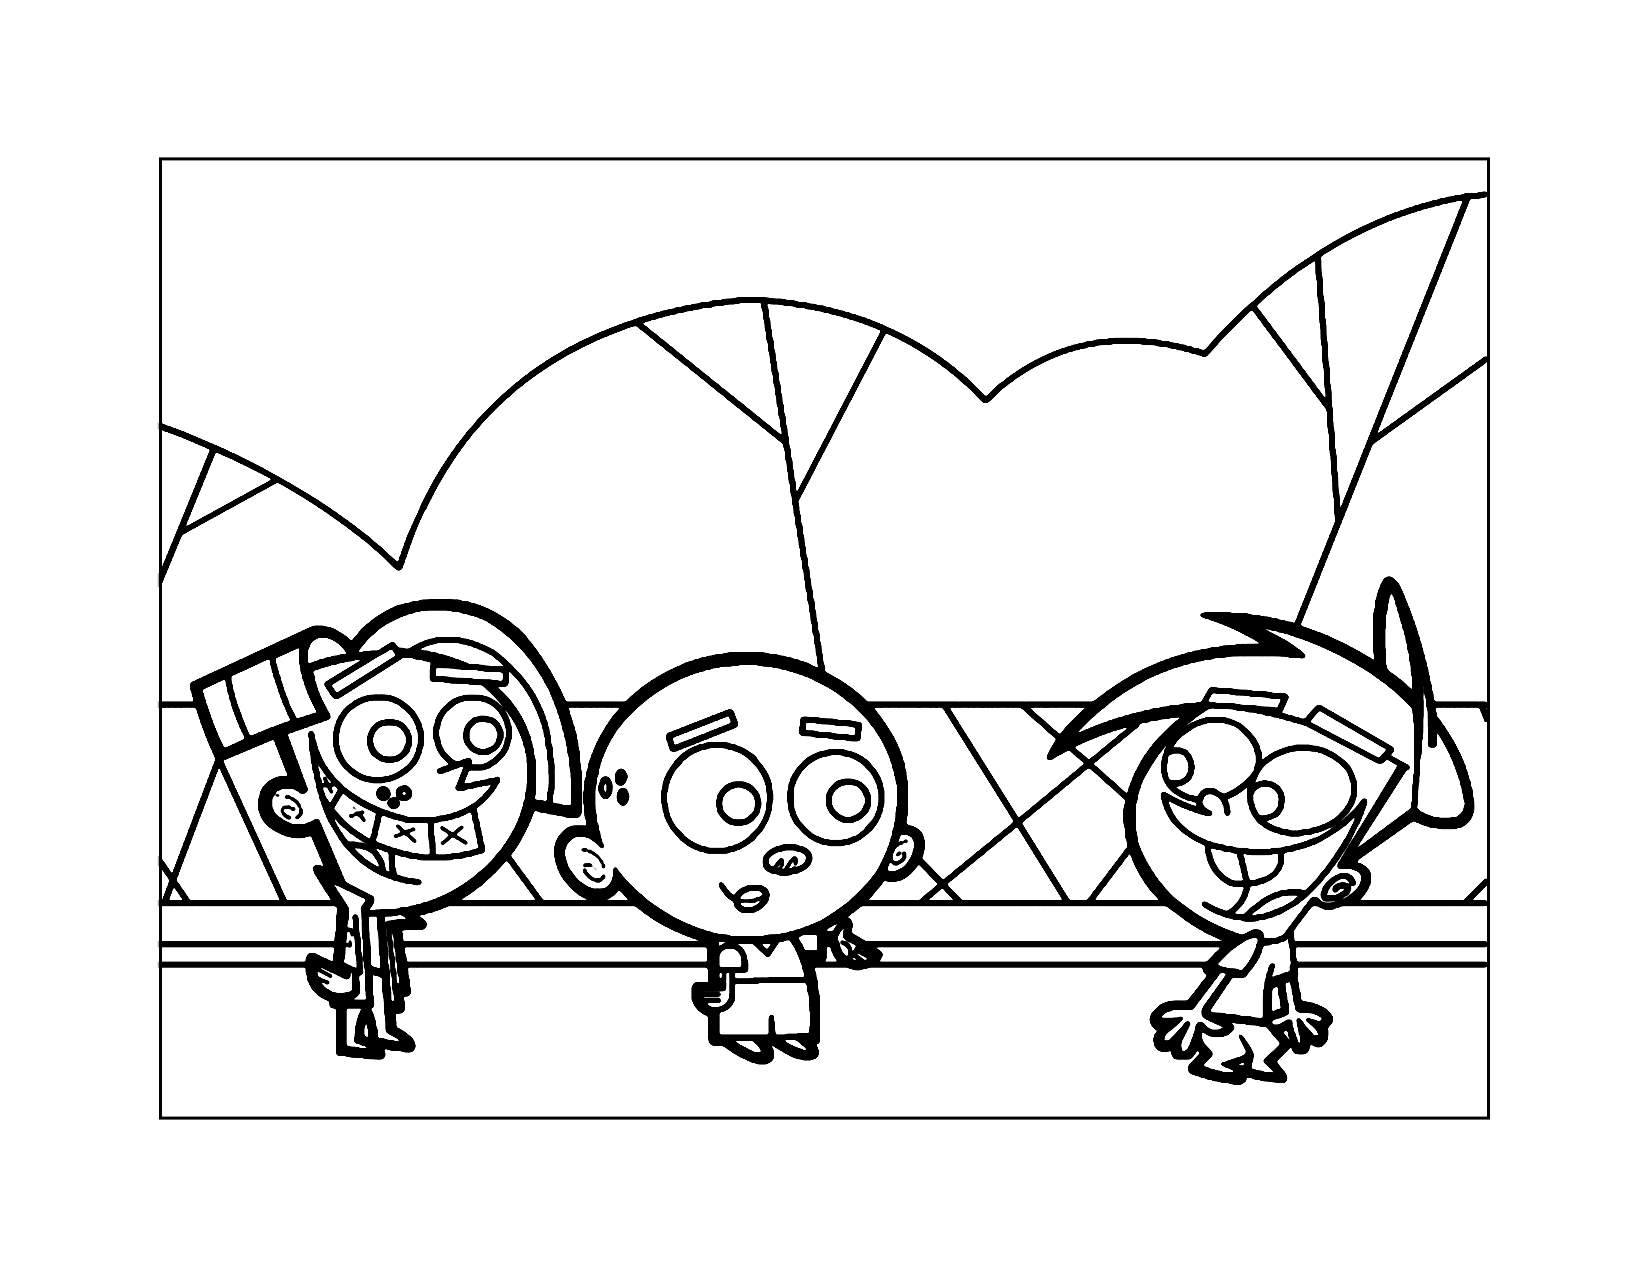 Timmys Friends Fairly Odd Parents Coloring Page